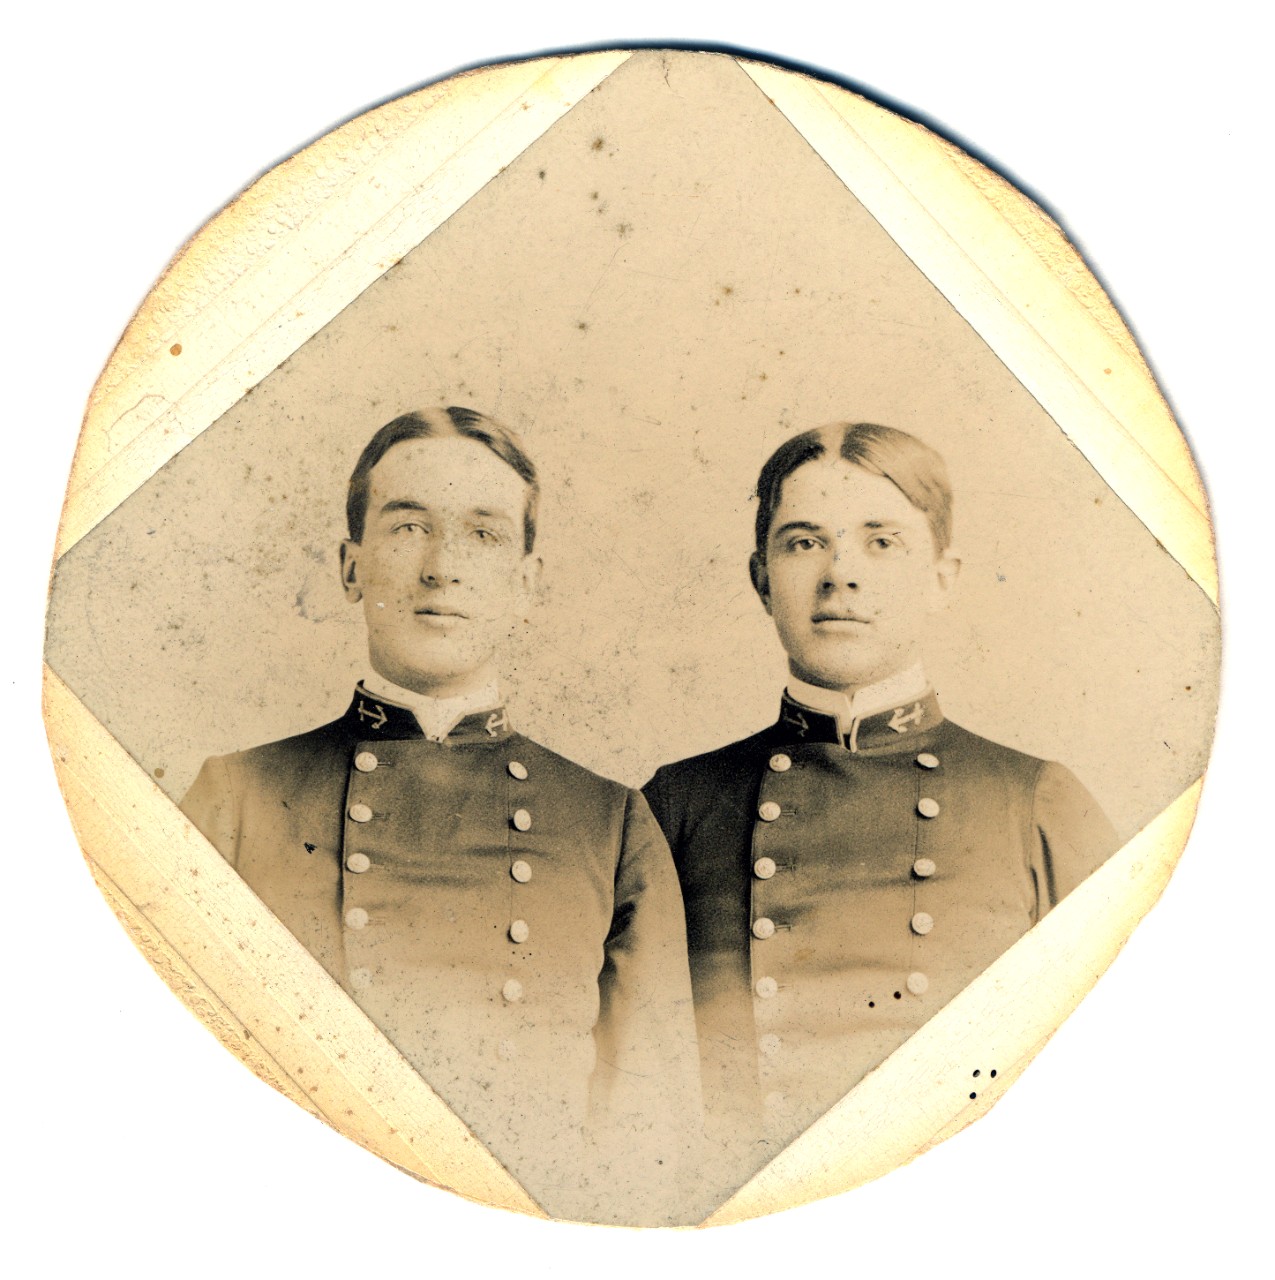 Naval Cadets Ralph Earle and Dudley Knox, taken at the United States Naval Academy, circa 1894.